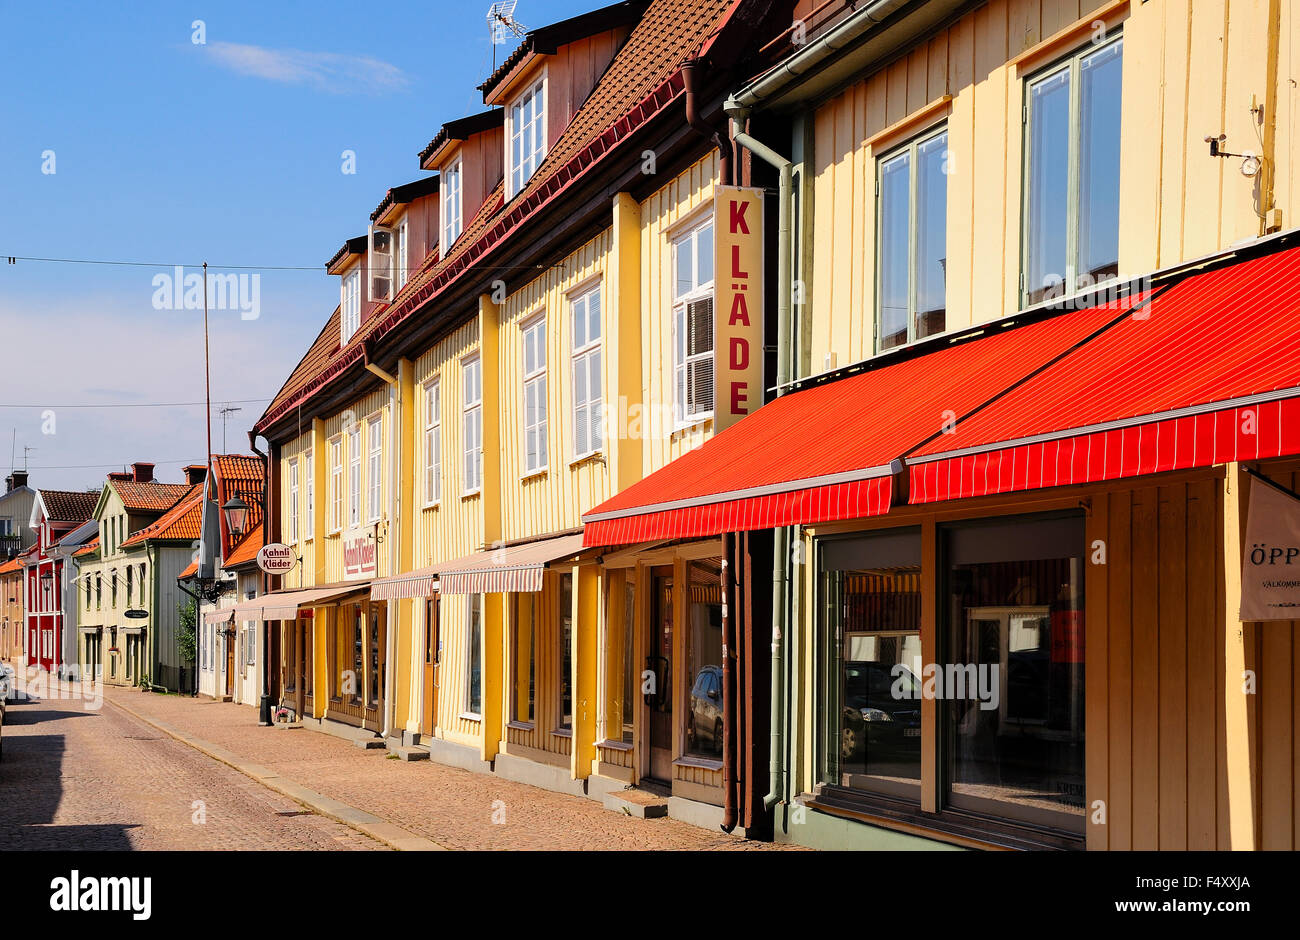 Storgatan High Resolution Stock Photography and Images - Alamy